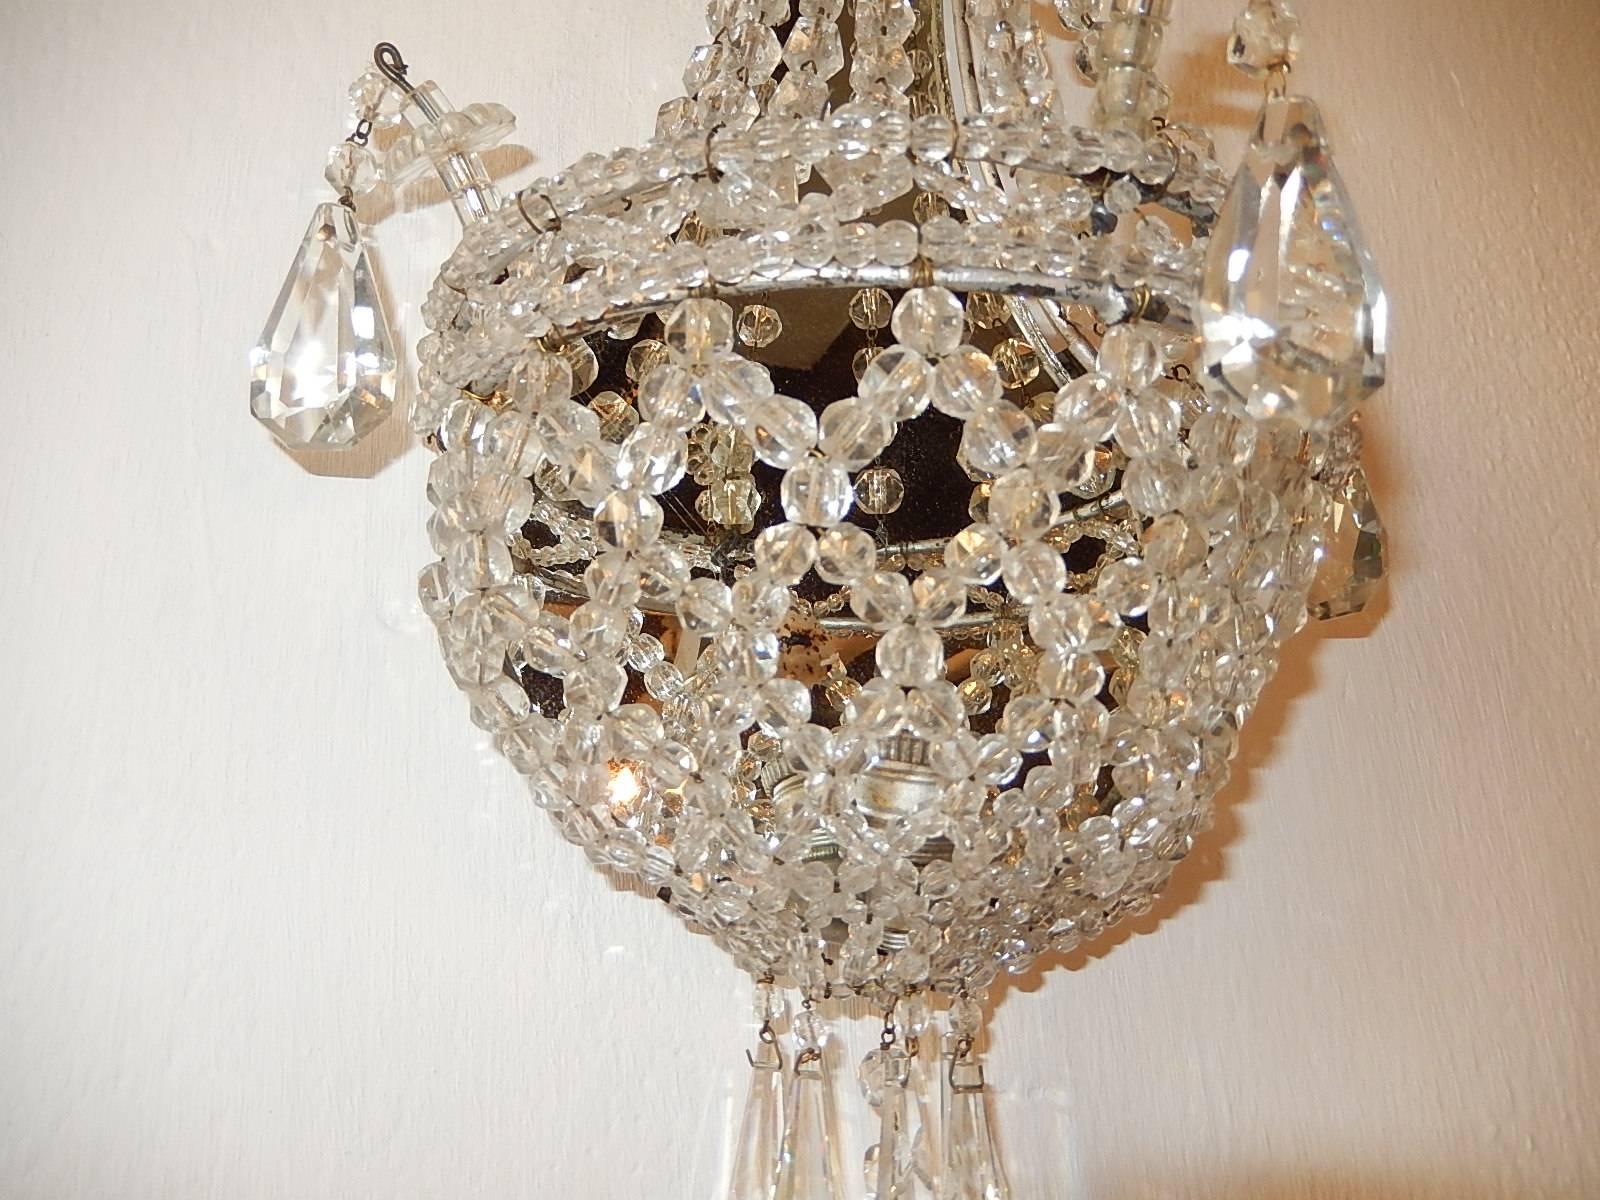 Mid-20th Century Crystal Beaded Basket with Prisms and Mirrors Sconces